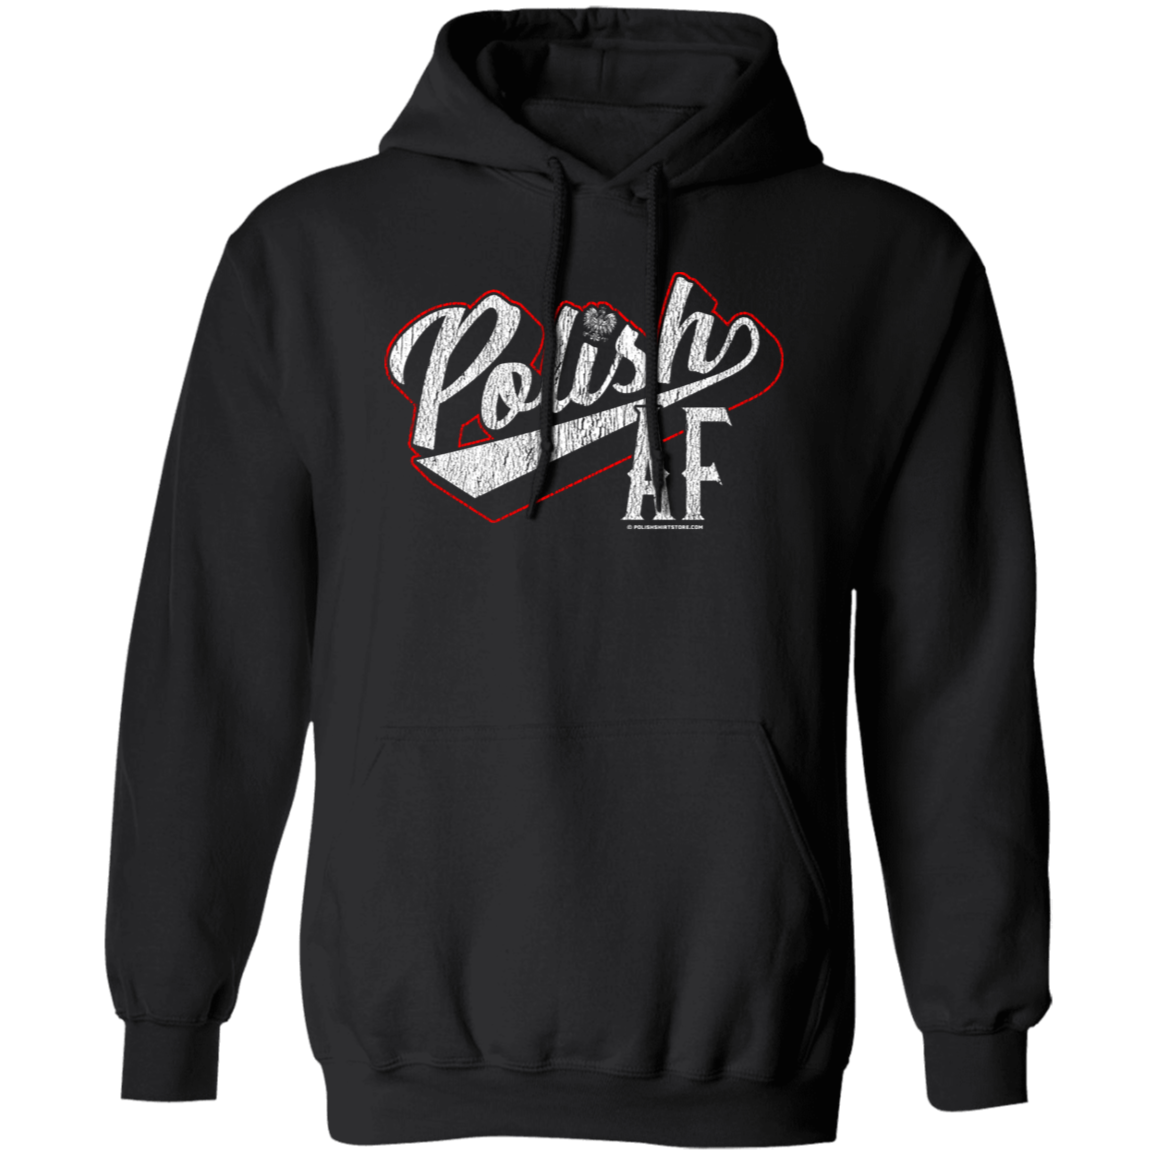 Polish AF With Red Outline Apparel CustomCat G185 Pullover Hoodie Black S